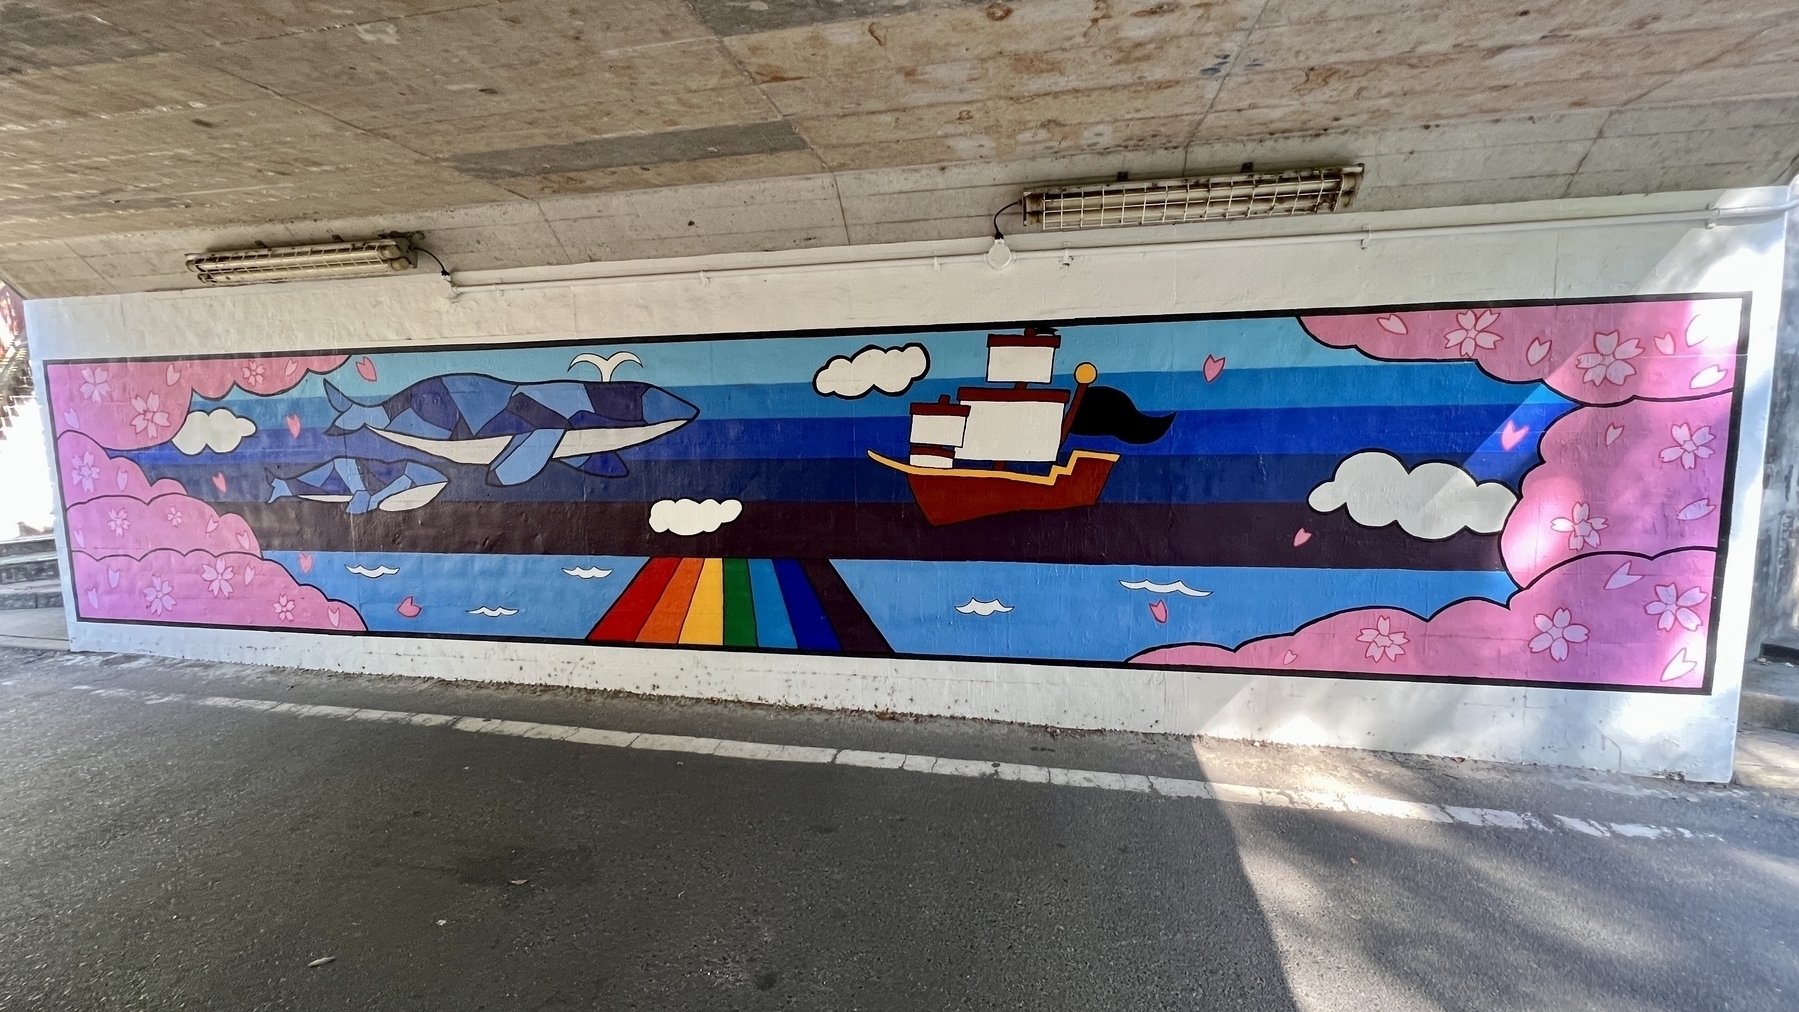 Wall mural depicting whales, a sailing ship, rainbows, and cherry blossoms